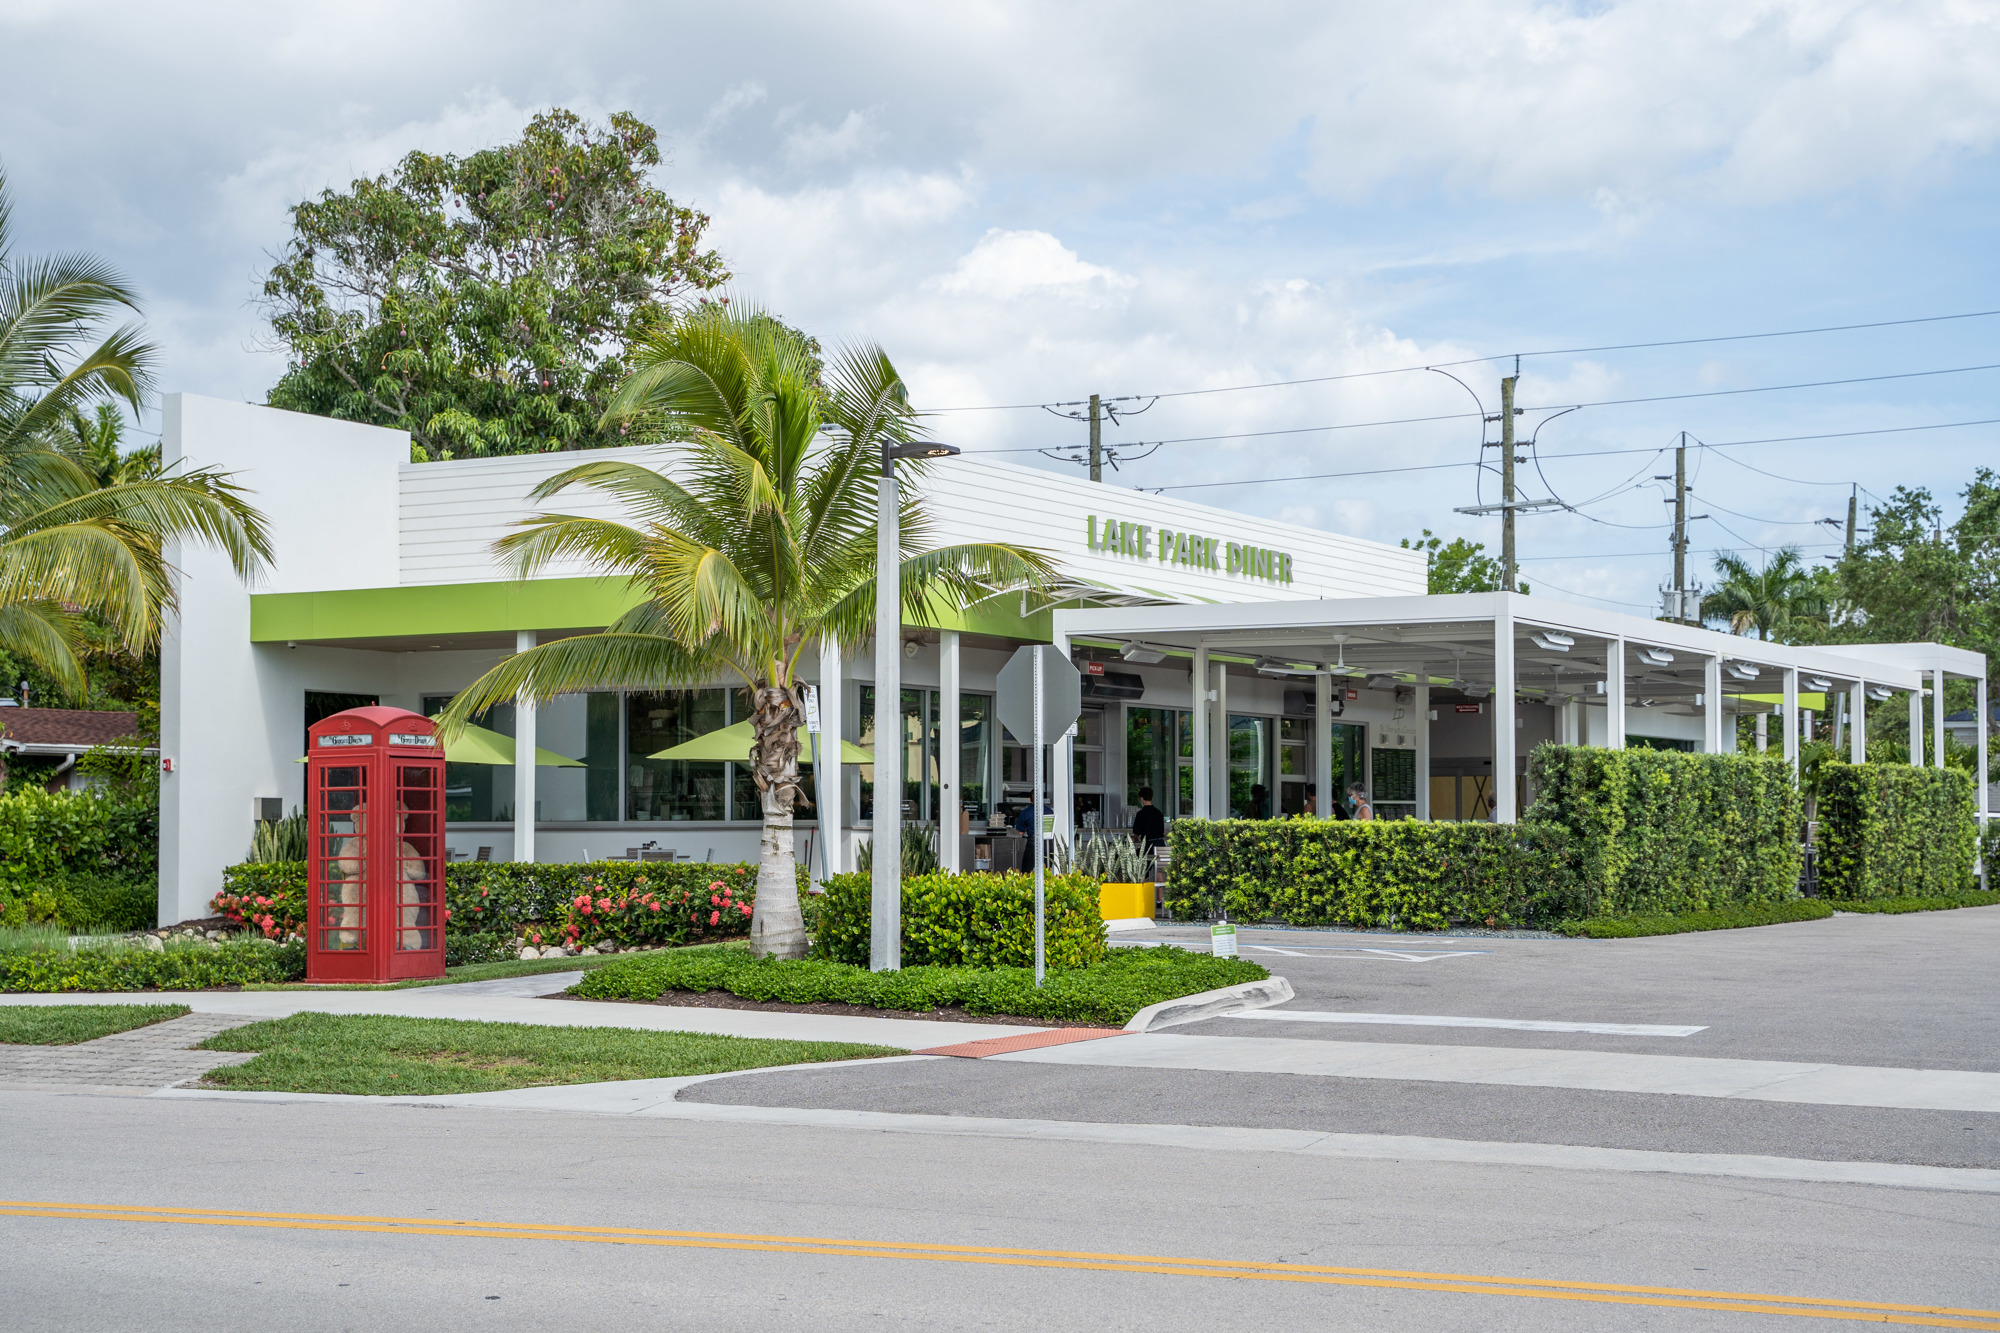 The original Lake Park Diner location is found in Naples, Florida. (Courtesy photo)